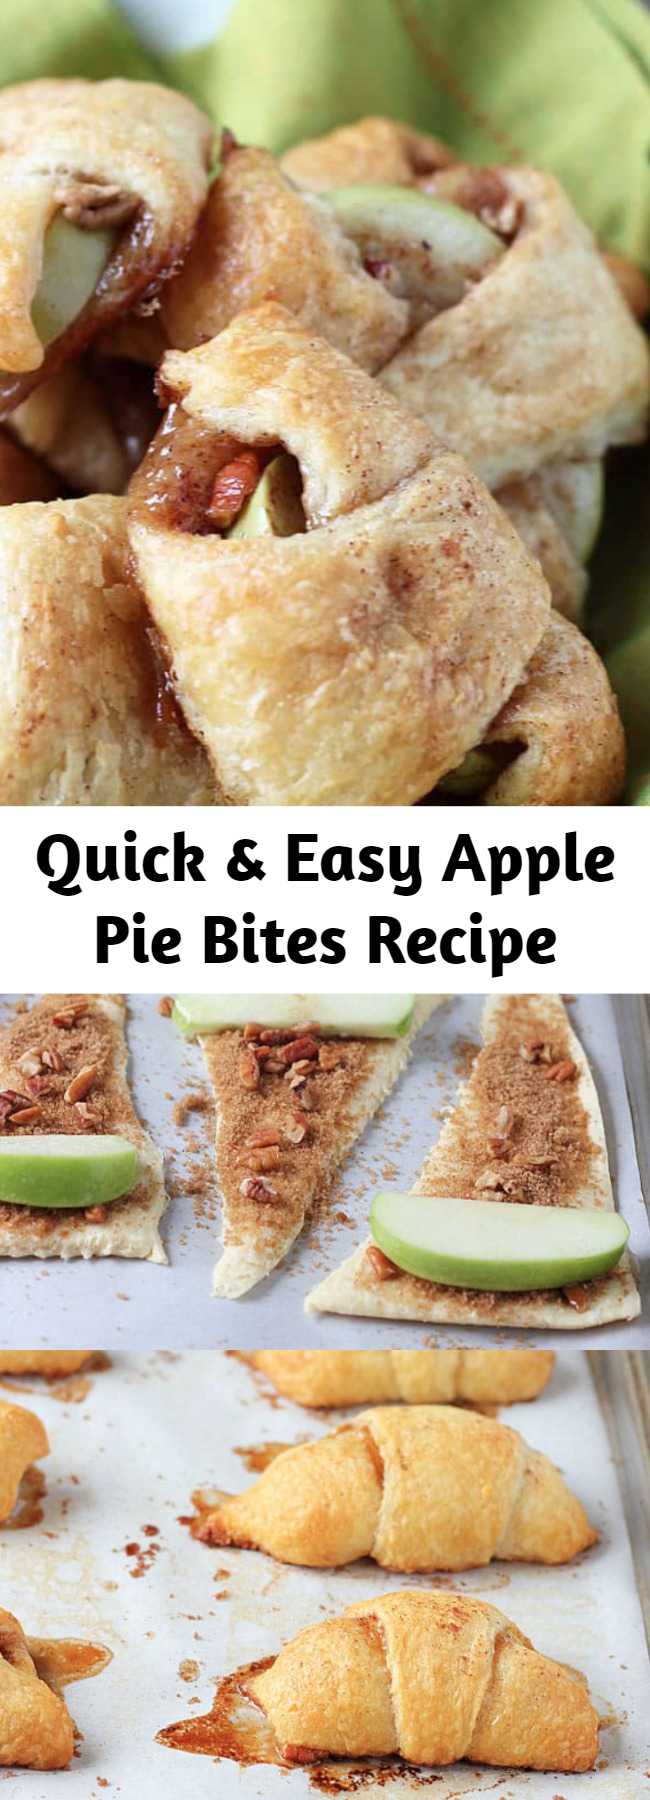 Quick & Easy Apple Pie Bites Recipe - Delicious, quick and easy mini apple pies made with Pillsbury crescent rolls in less than 30 minutes! These incredibly delicious Apple Pie Bites are going to be your go-to apple dessert in a hurry! These taste better than apple pie!!